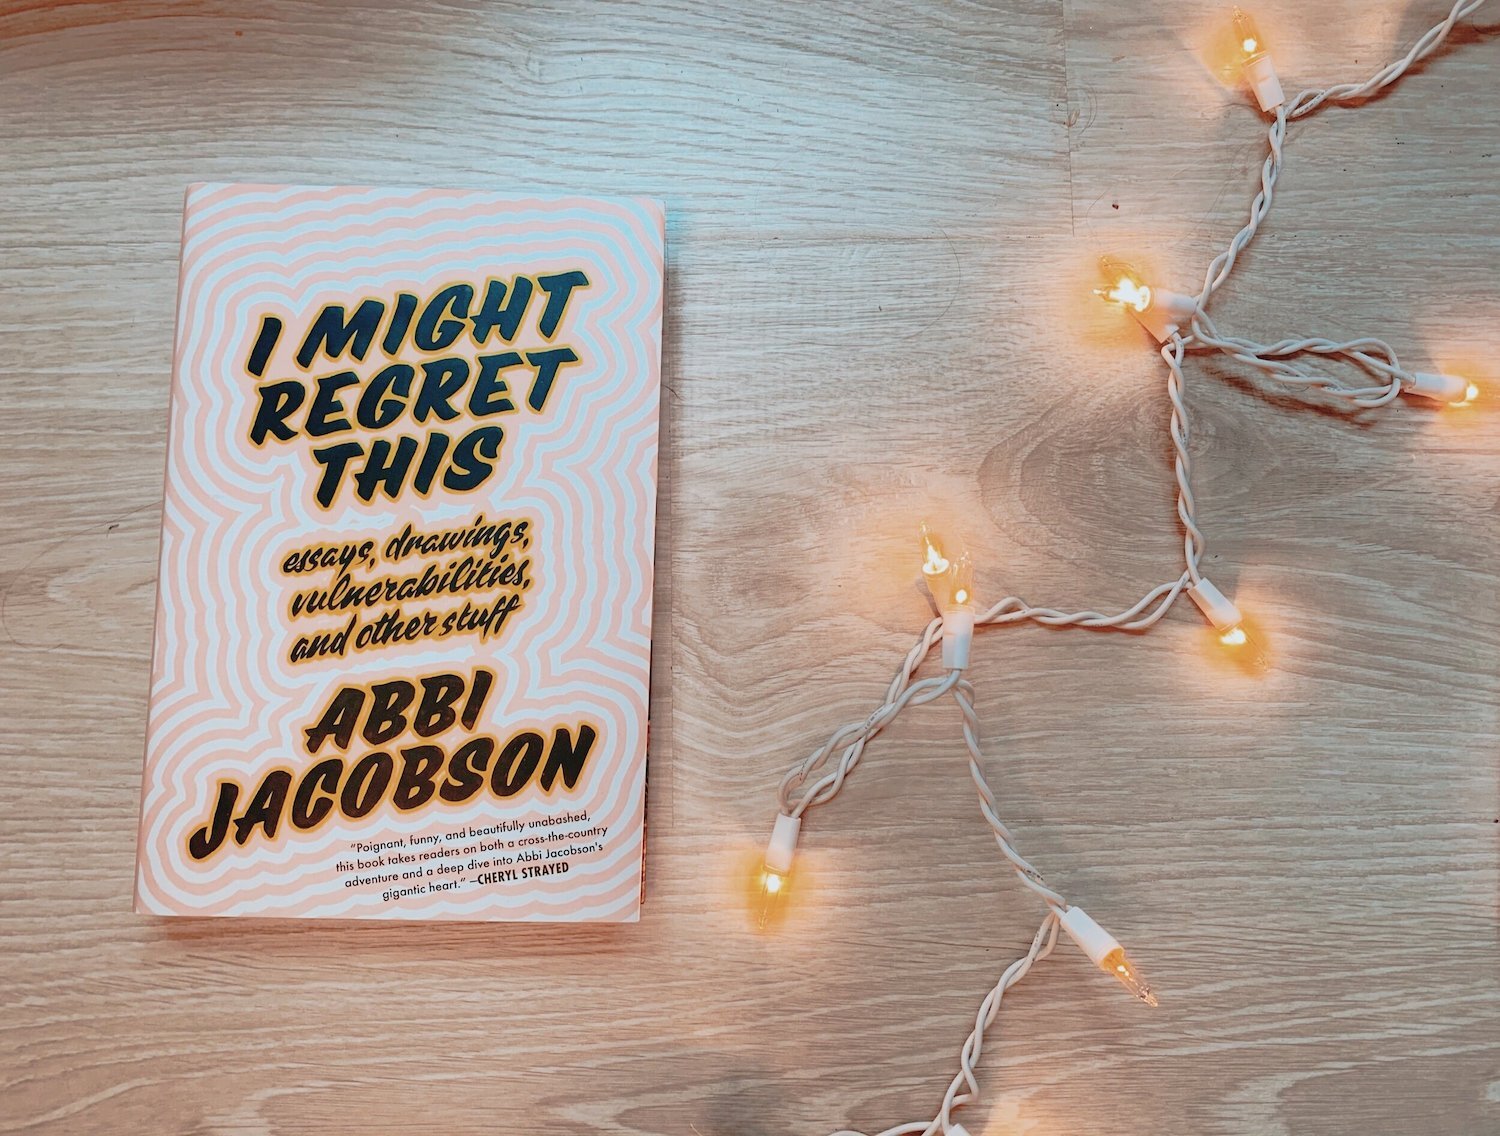 The book I Might Regret This by Abbi Jacobson is against a light wooden background with a strand of warm twinkly beside it.